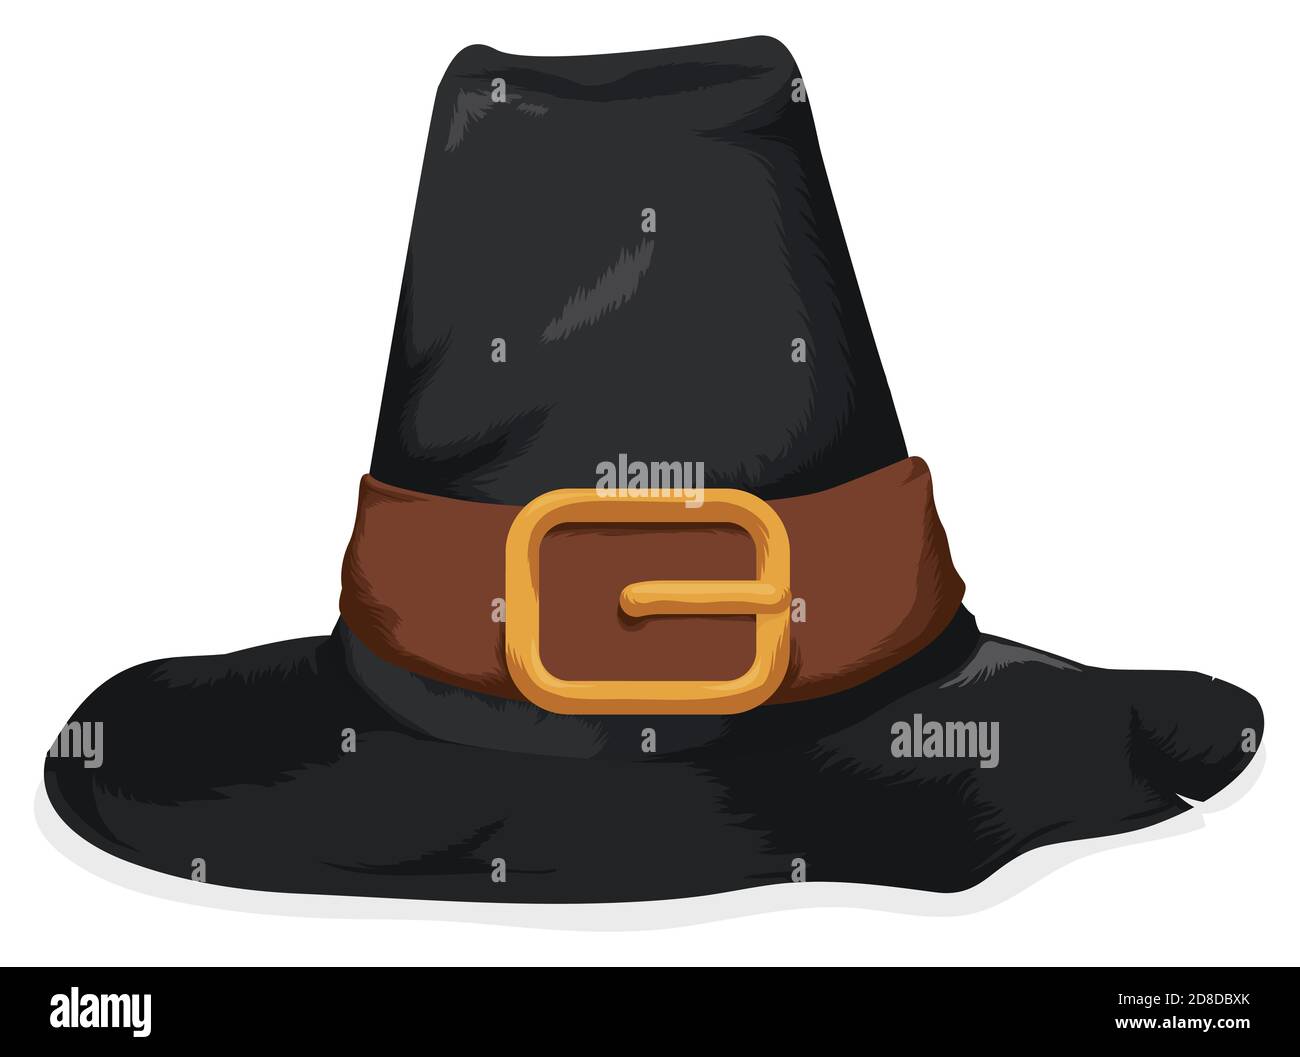 Old pilgrim hat with wrinkled and ragged brim, leather band and golden buckle, isolated over white background. Stock Vector